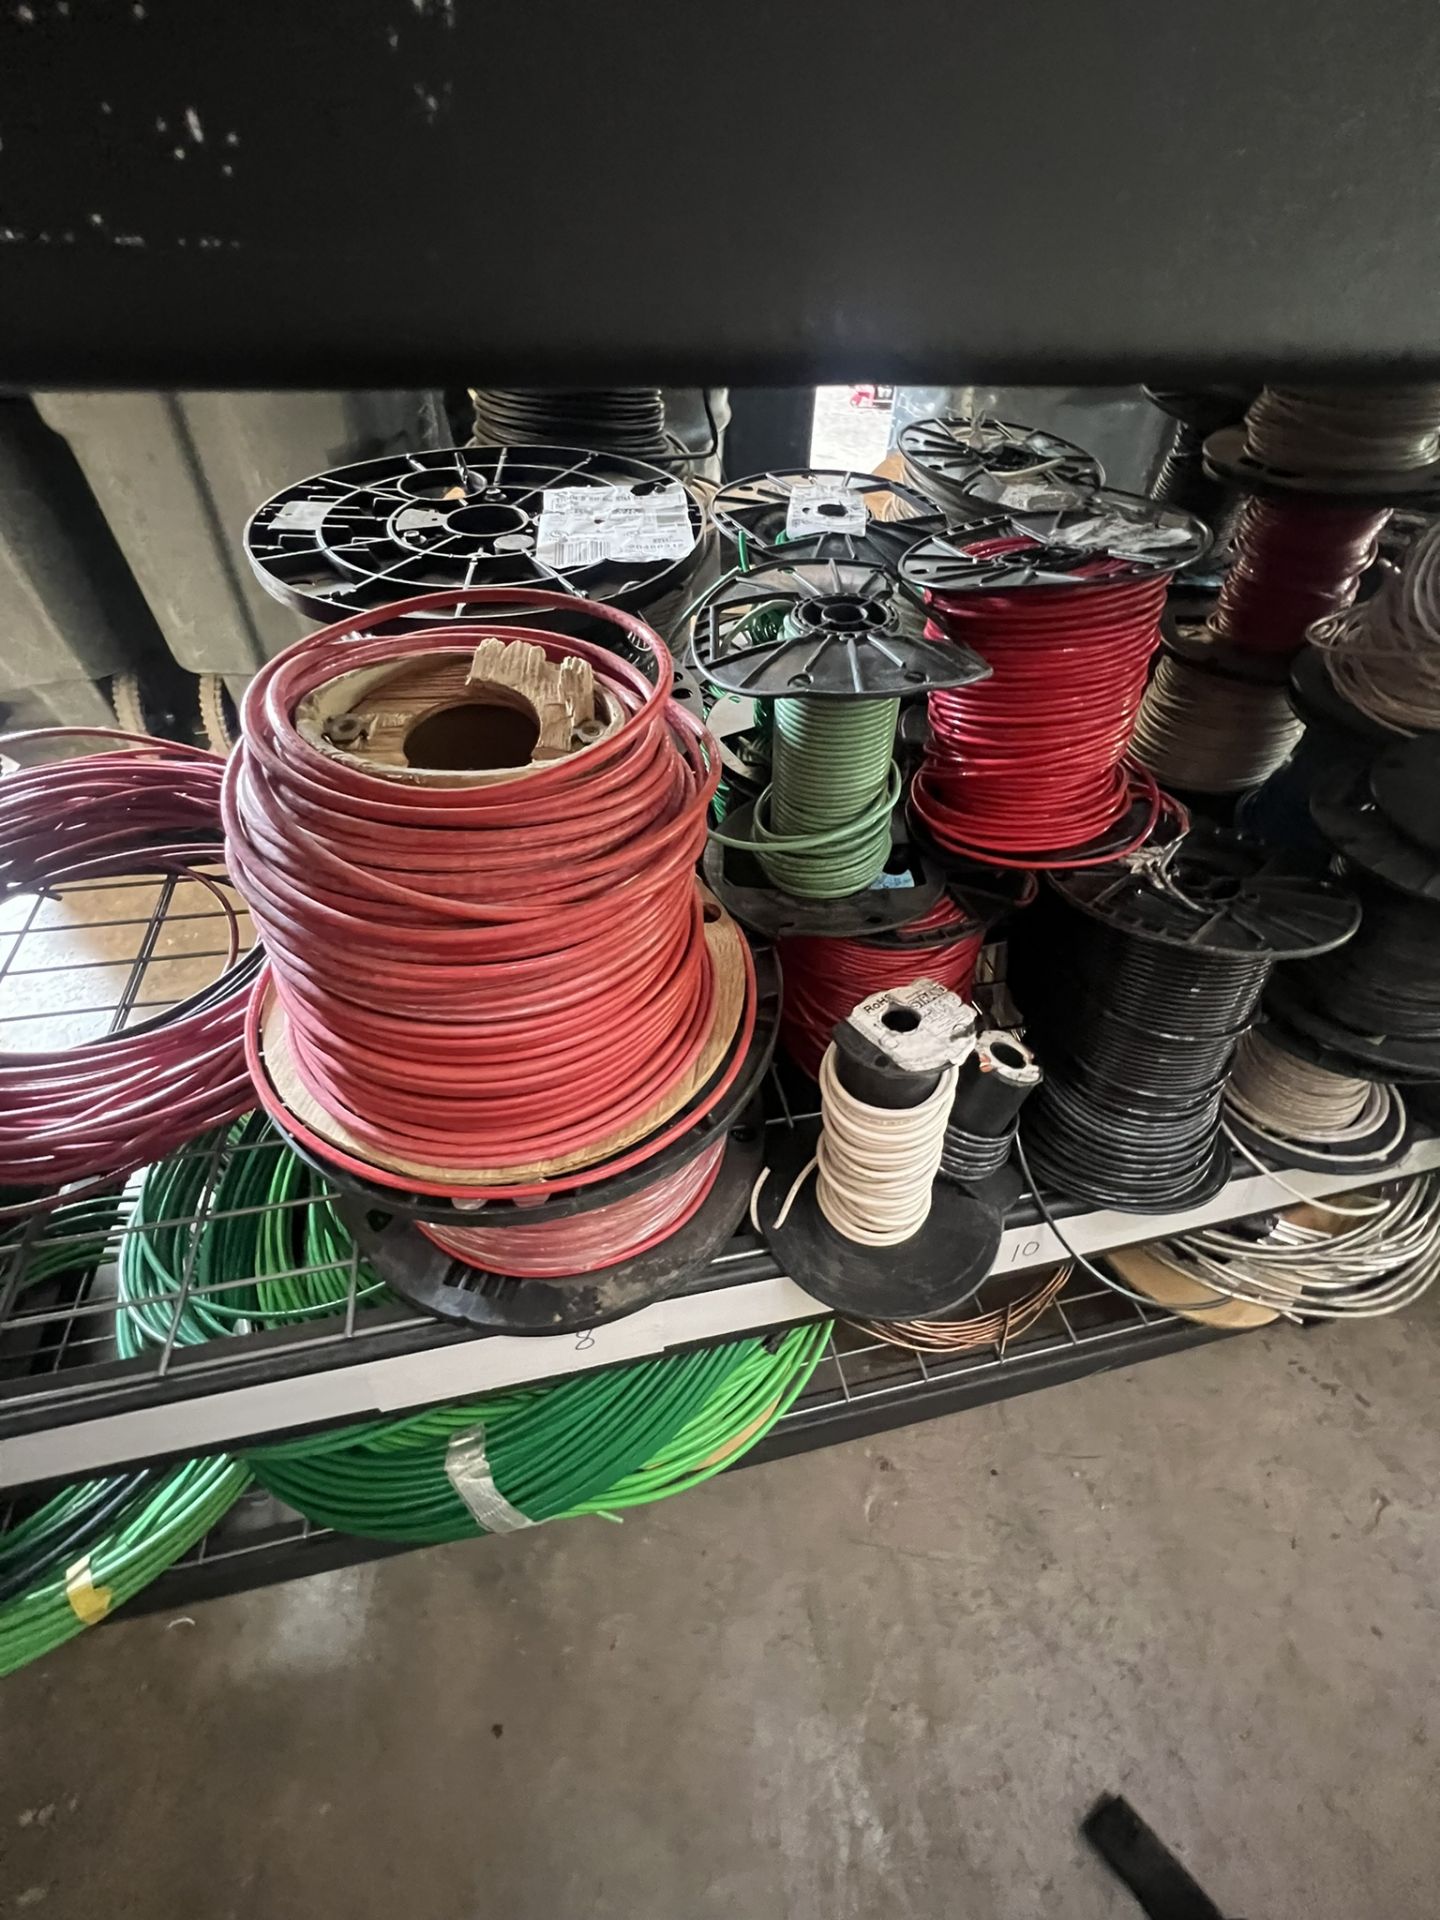 3 Shelves of Wire Spools, Power Cable EP39-02547b, 12AWG, CAT 5, and 10 gauge wire, some copper - Image 2 of 4